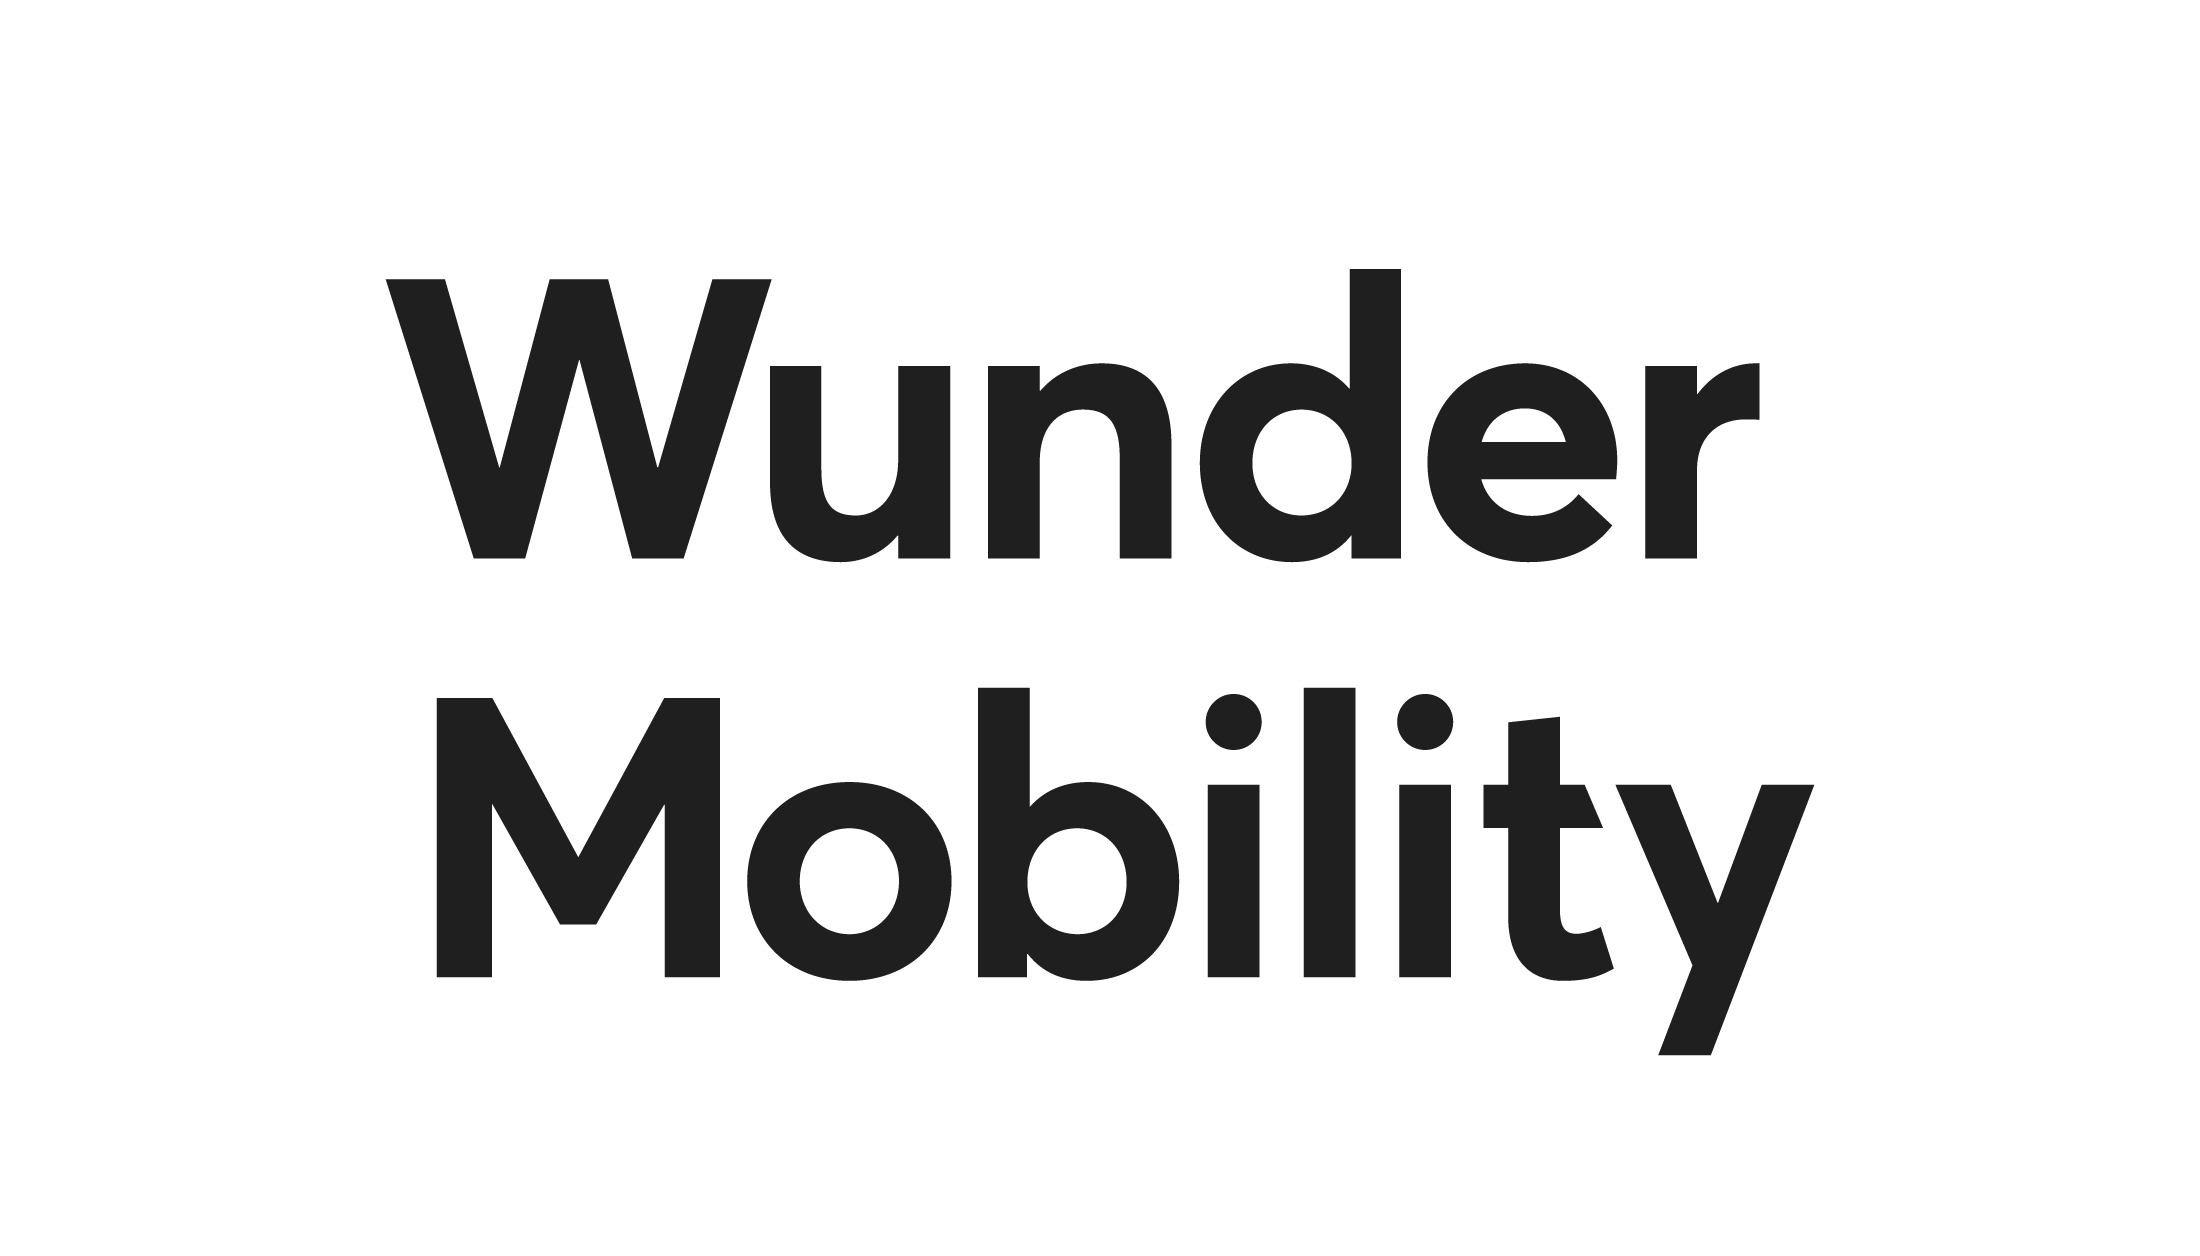 WunderCar Mobility Solutions GmbH